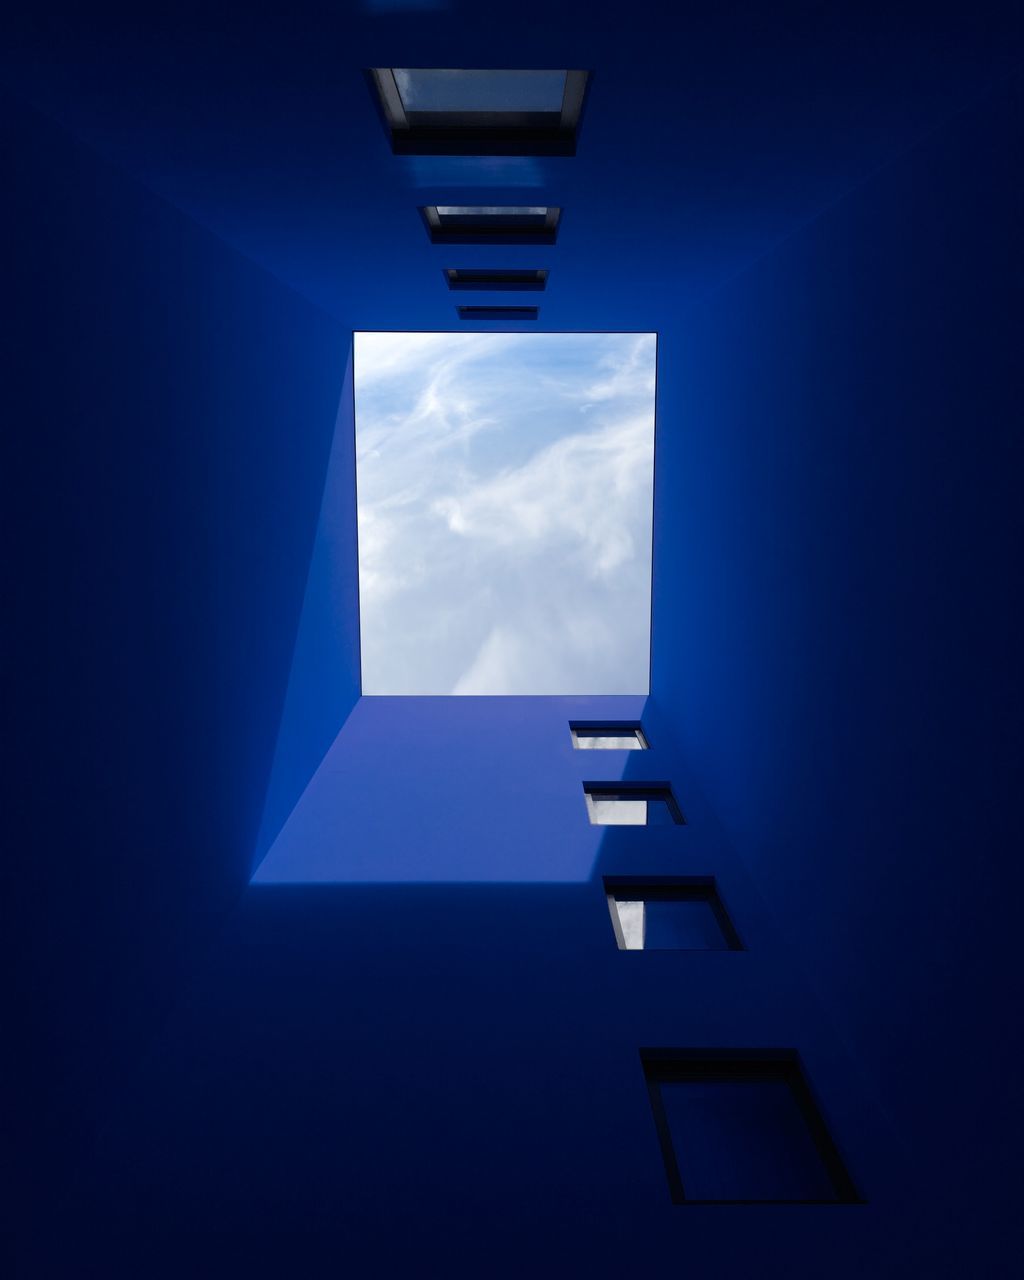 architecture, built structure, sky, low angle view, no people, building, nature, building exterior, blue, day, wall - building feature, cloud - sky, sunlight, outdoors, window, directly below, geometric shape, tall - high, pattern, skyscraper